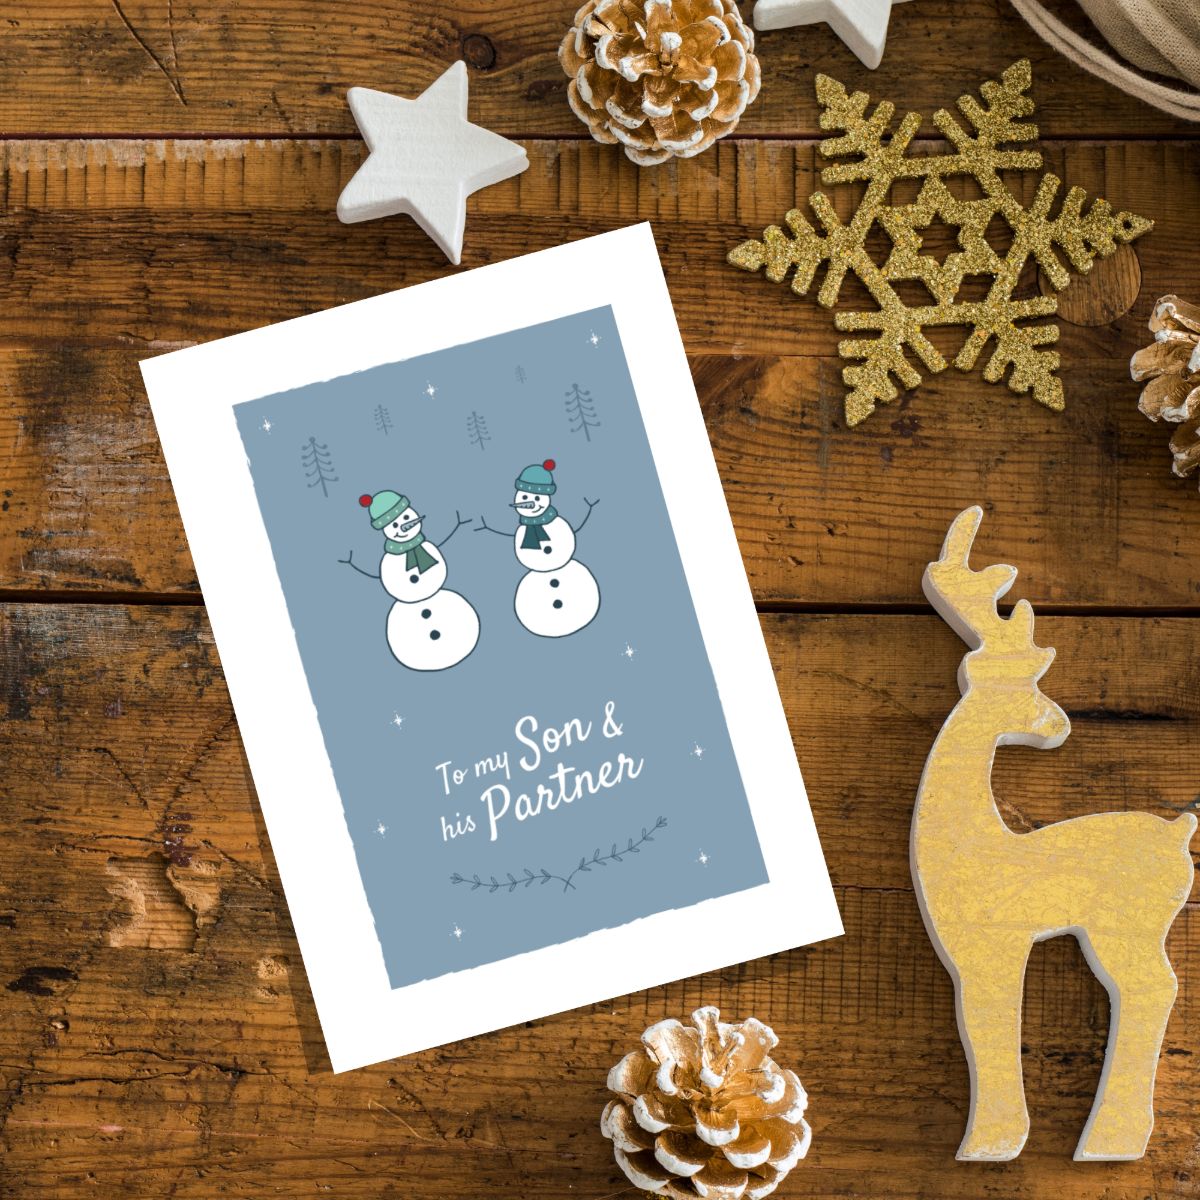 Christmas Greetings Card for my Son and his Partner